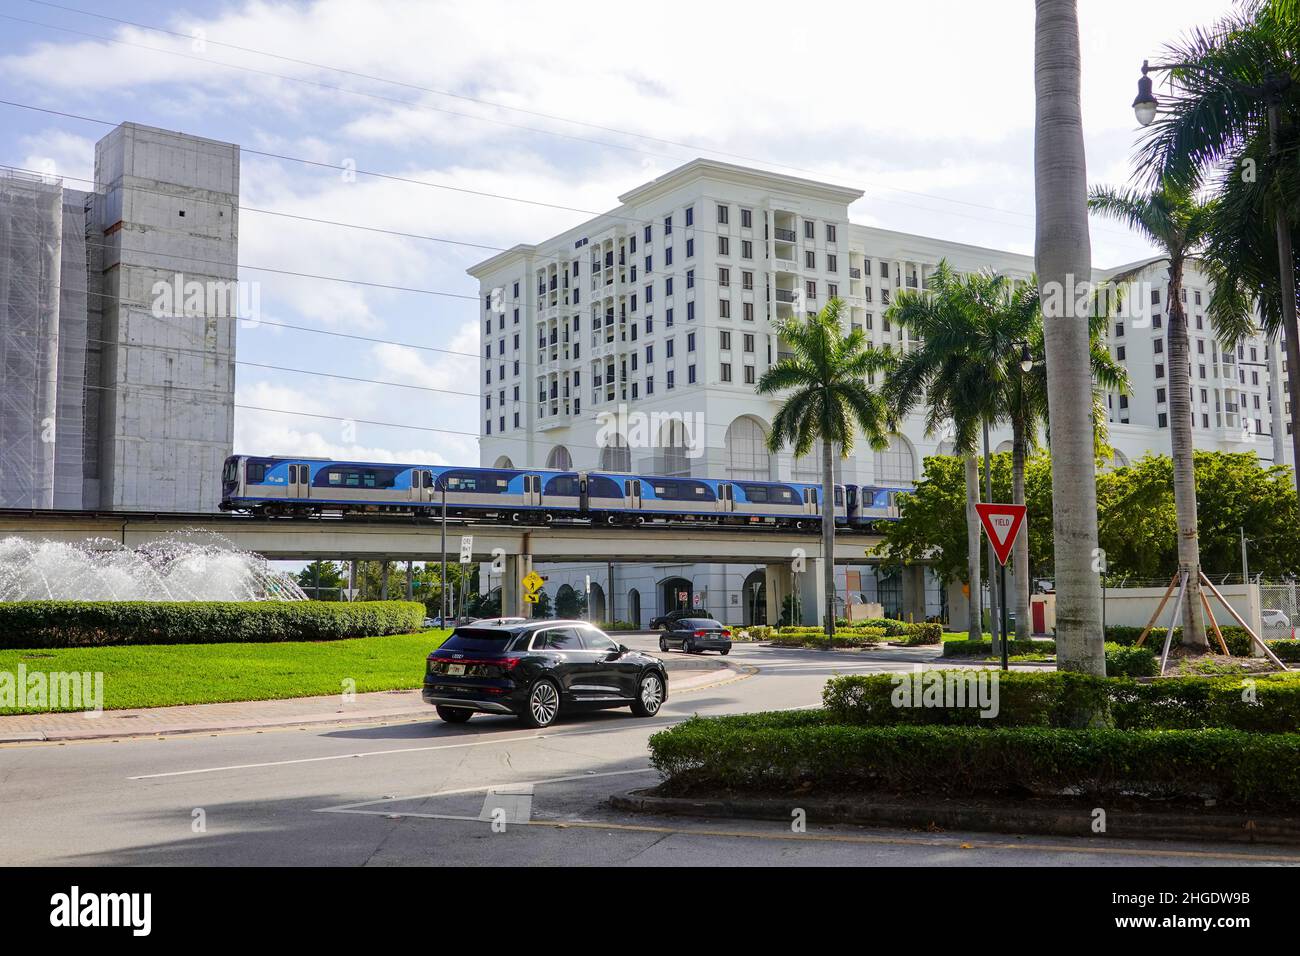 Miami-Dade County Metrorail, public transportation, train on elevated track moving through the Coral Gables area. Stock Photo